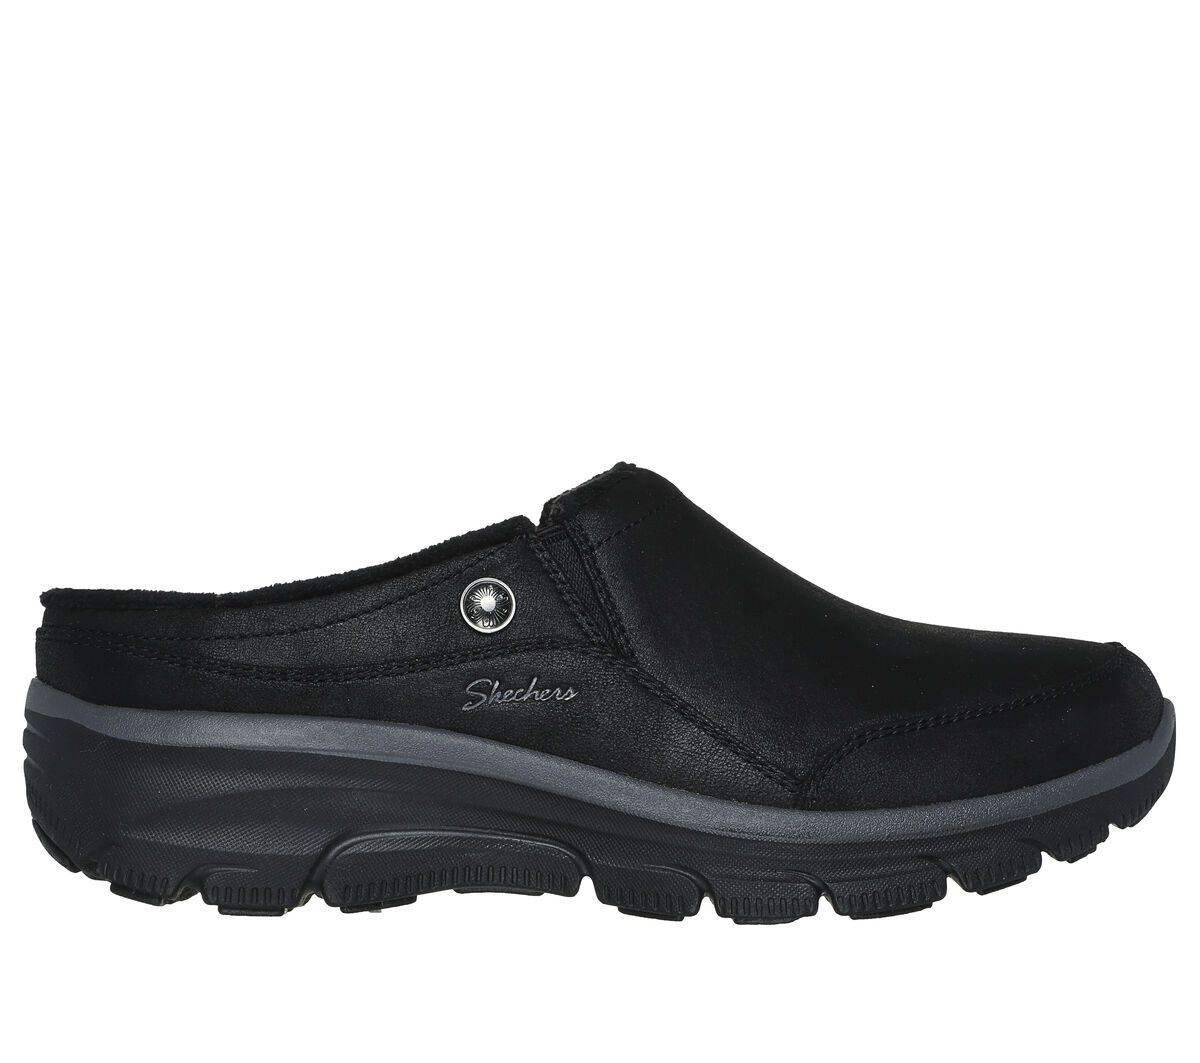 odio Matemático Obstinado Relaxed Fit: Easy Going - Latte 2 | SKECHERS